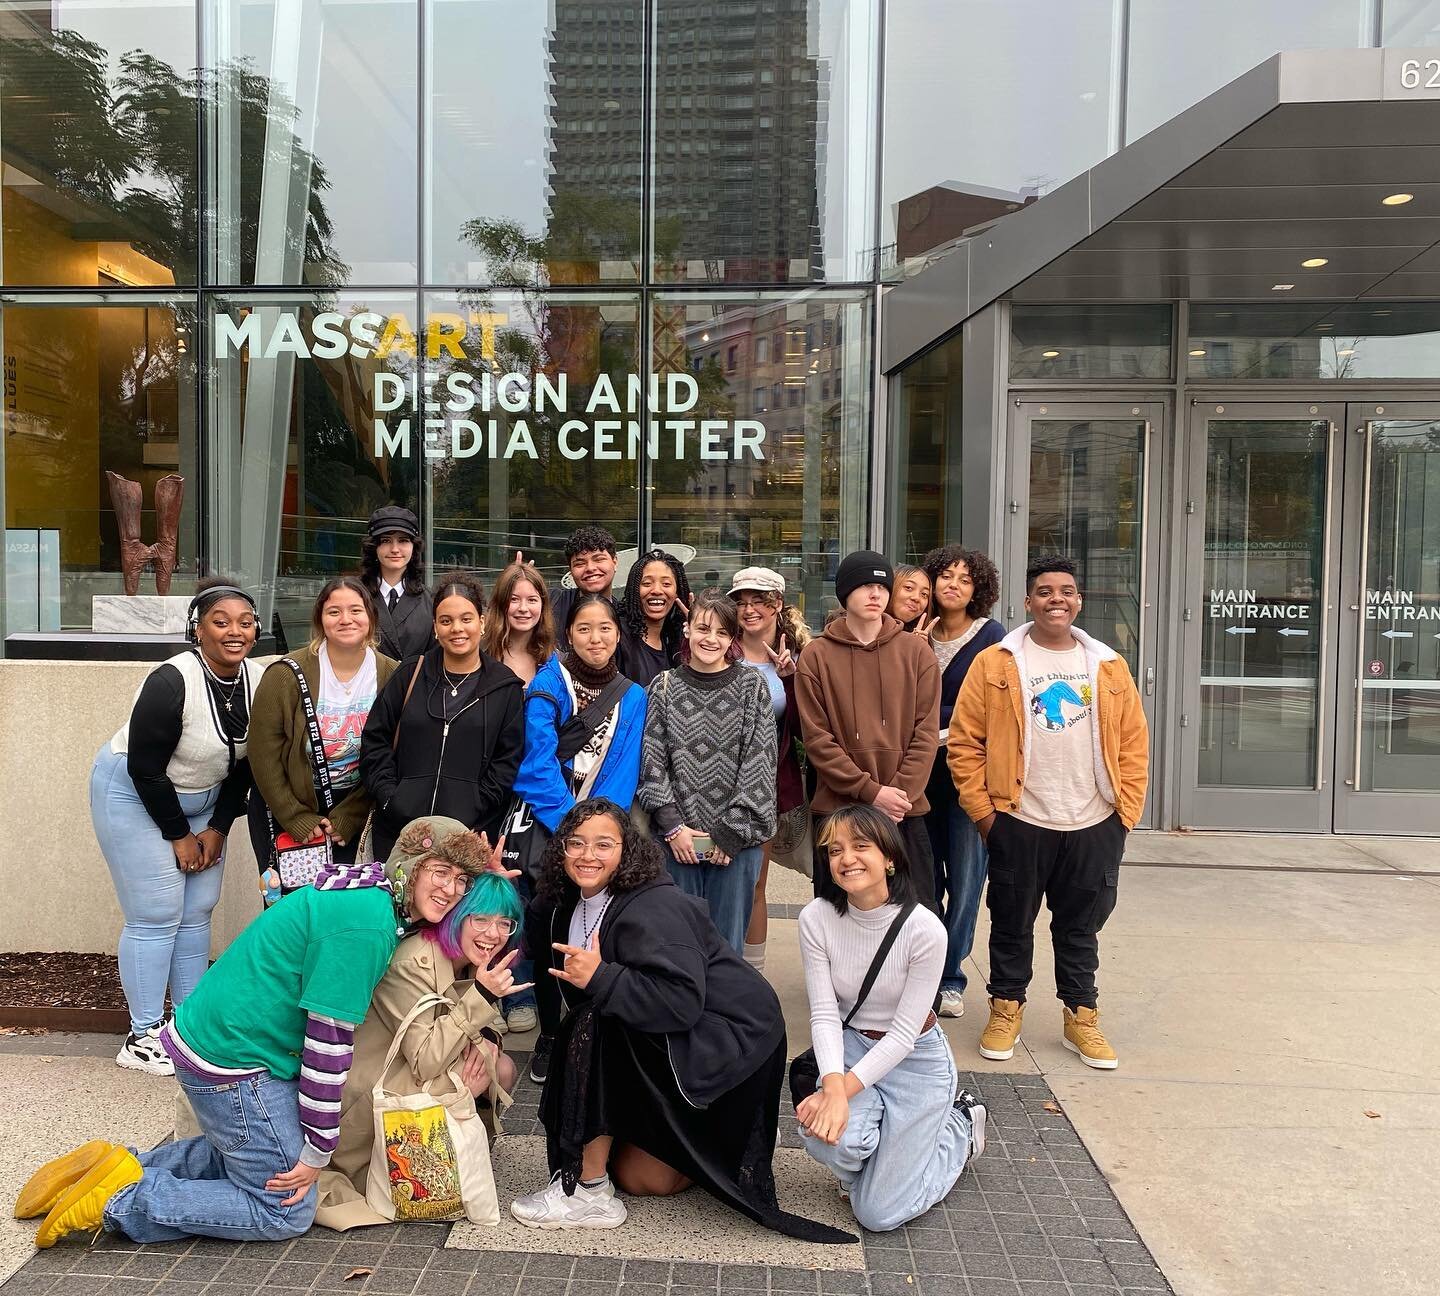 Today a group POD seniors and juniors had a fun visit to MassArt in Boston! We toured many of the studios and got lunch in the cafeteria. It was a great way to kick off the academic year :) Thanks @massartboston for welcoming us and showing us around